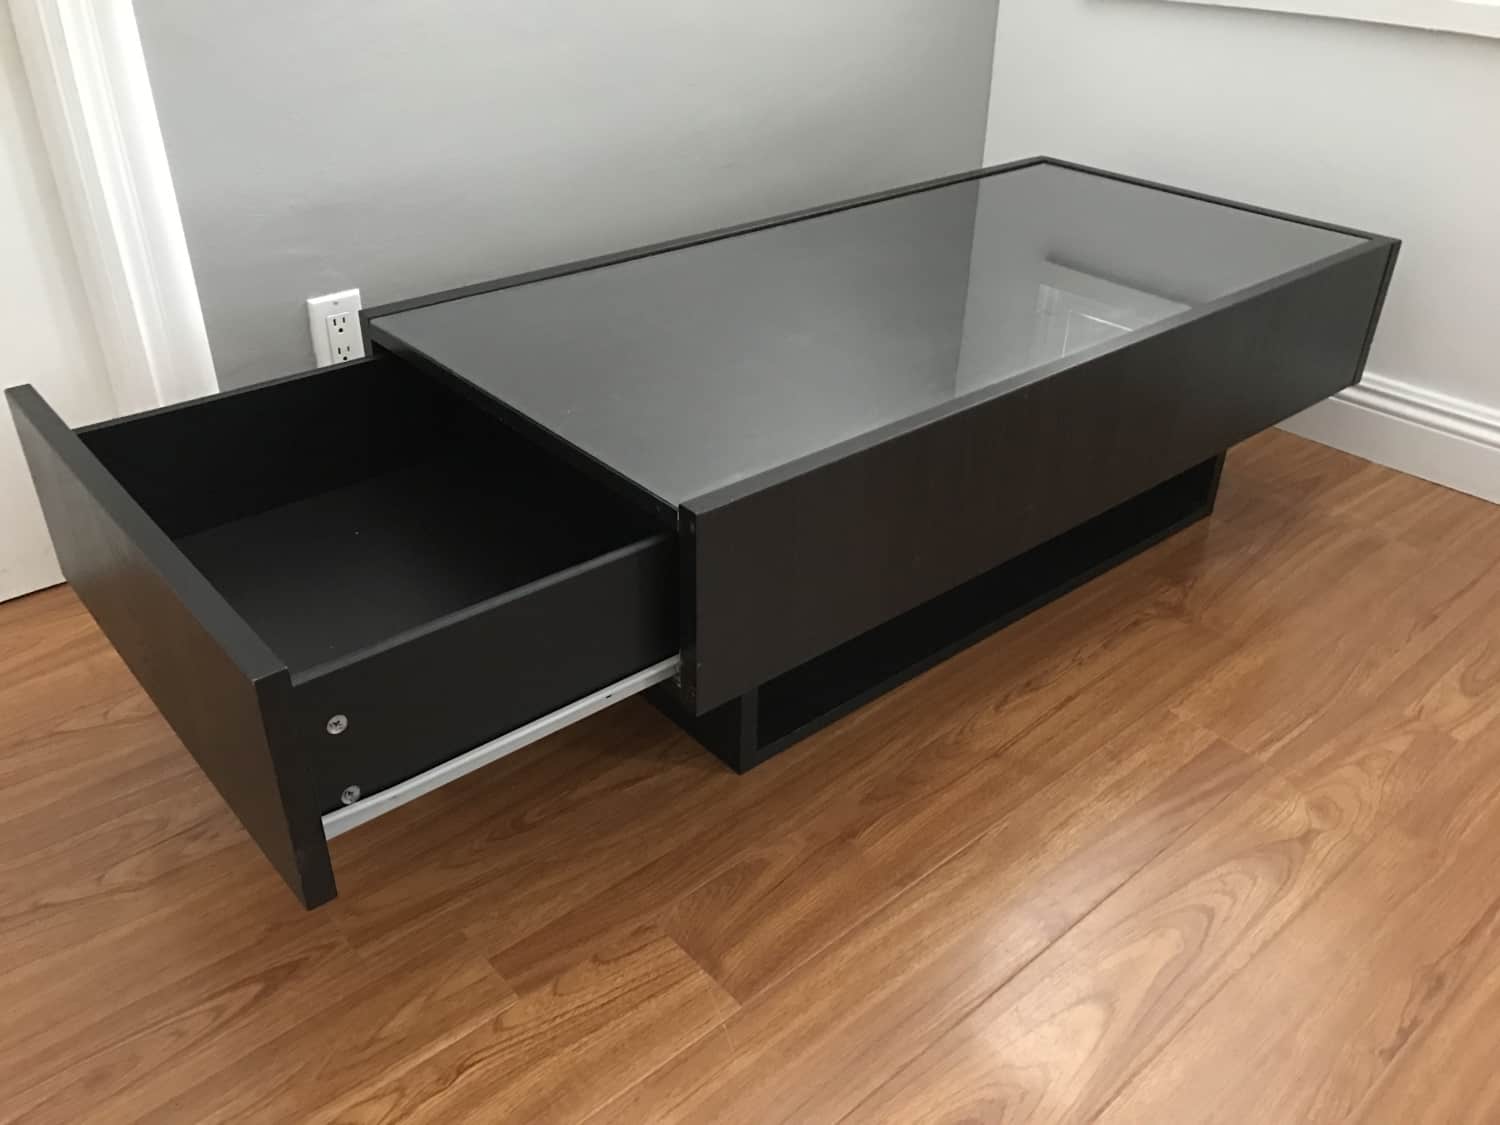 Ikea Ramvik Coffee table with Side Storage Drawers - Apartment Therapy